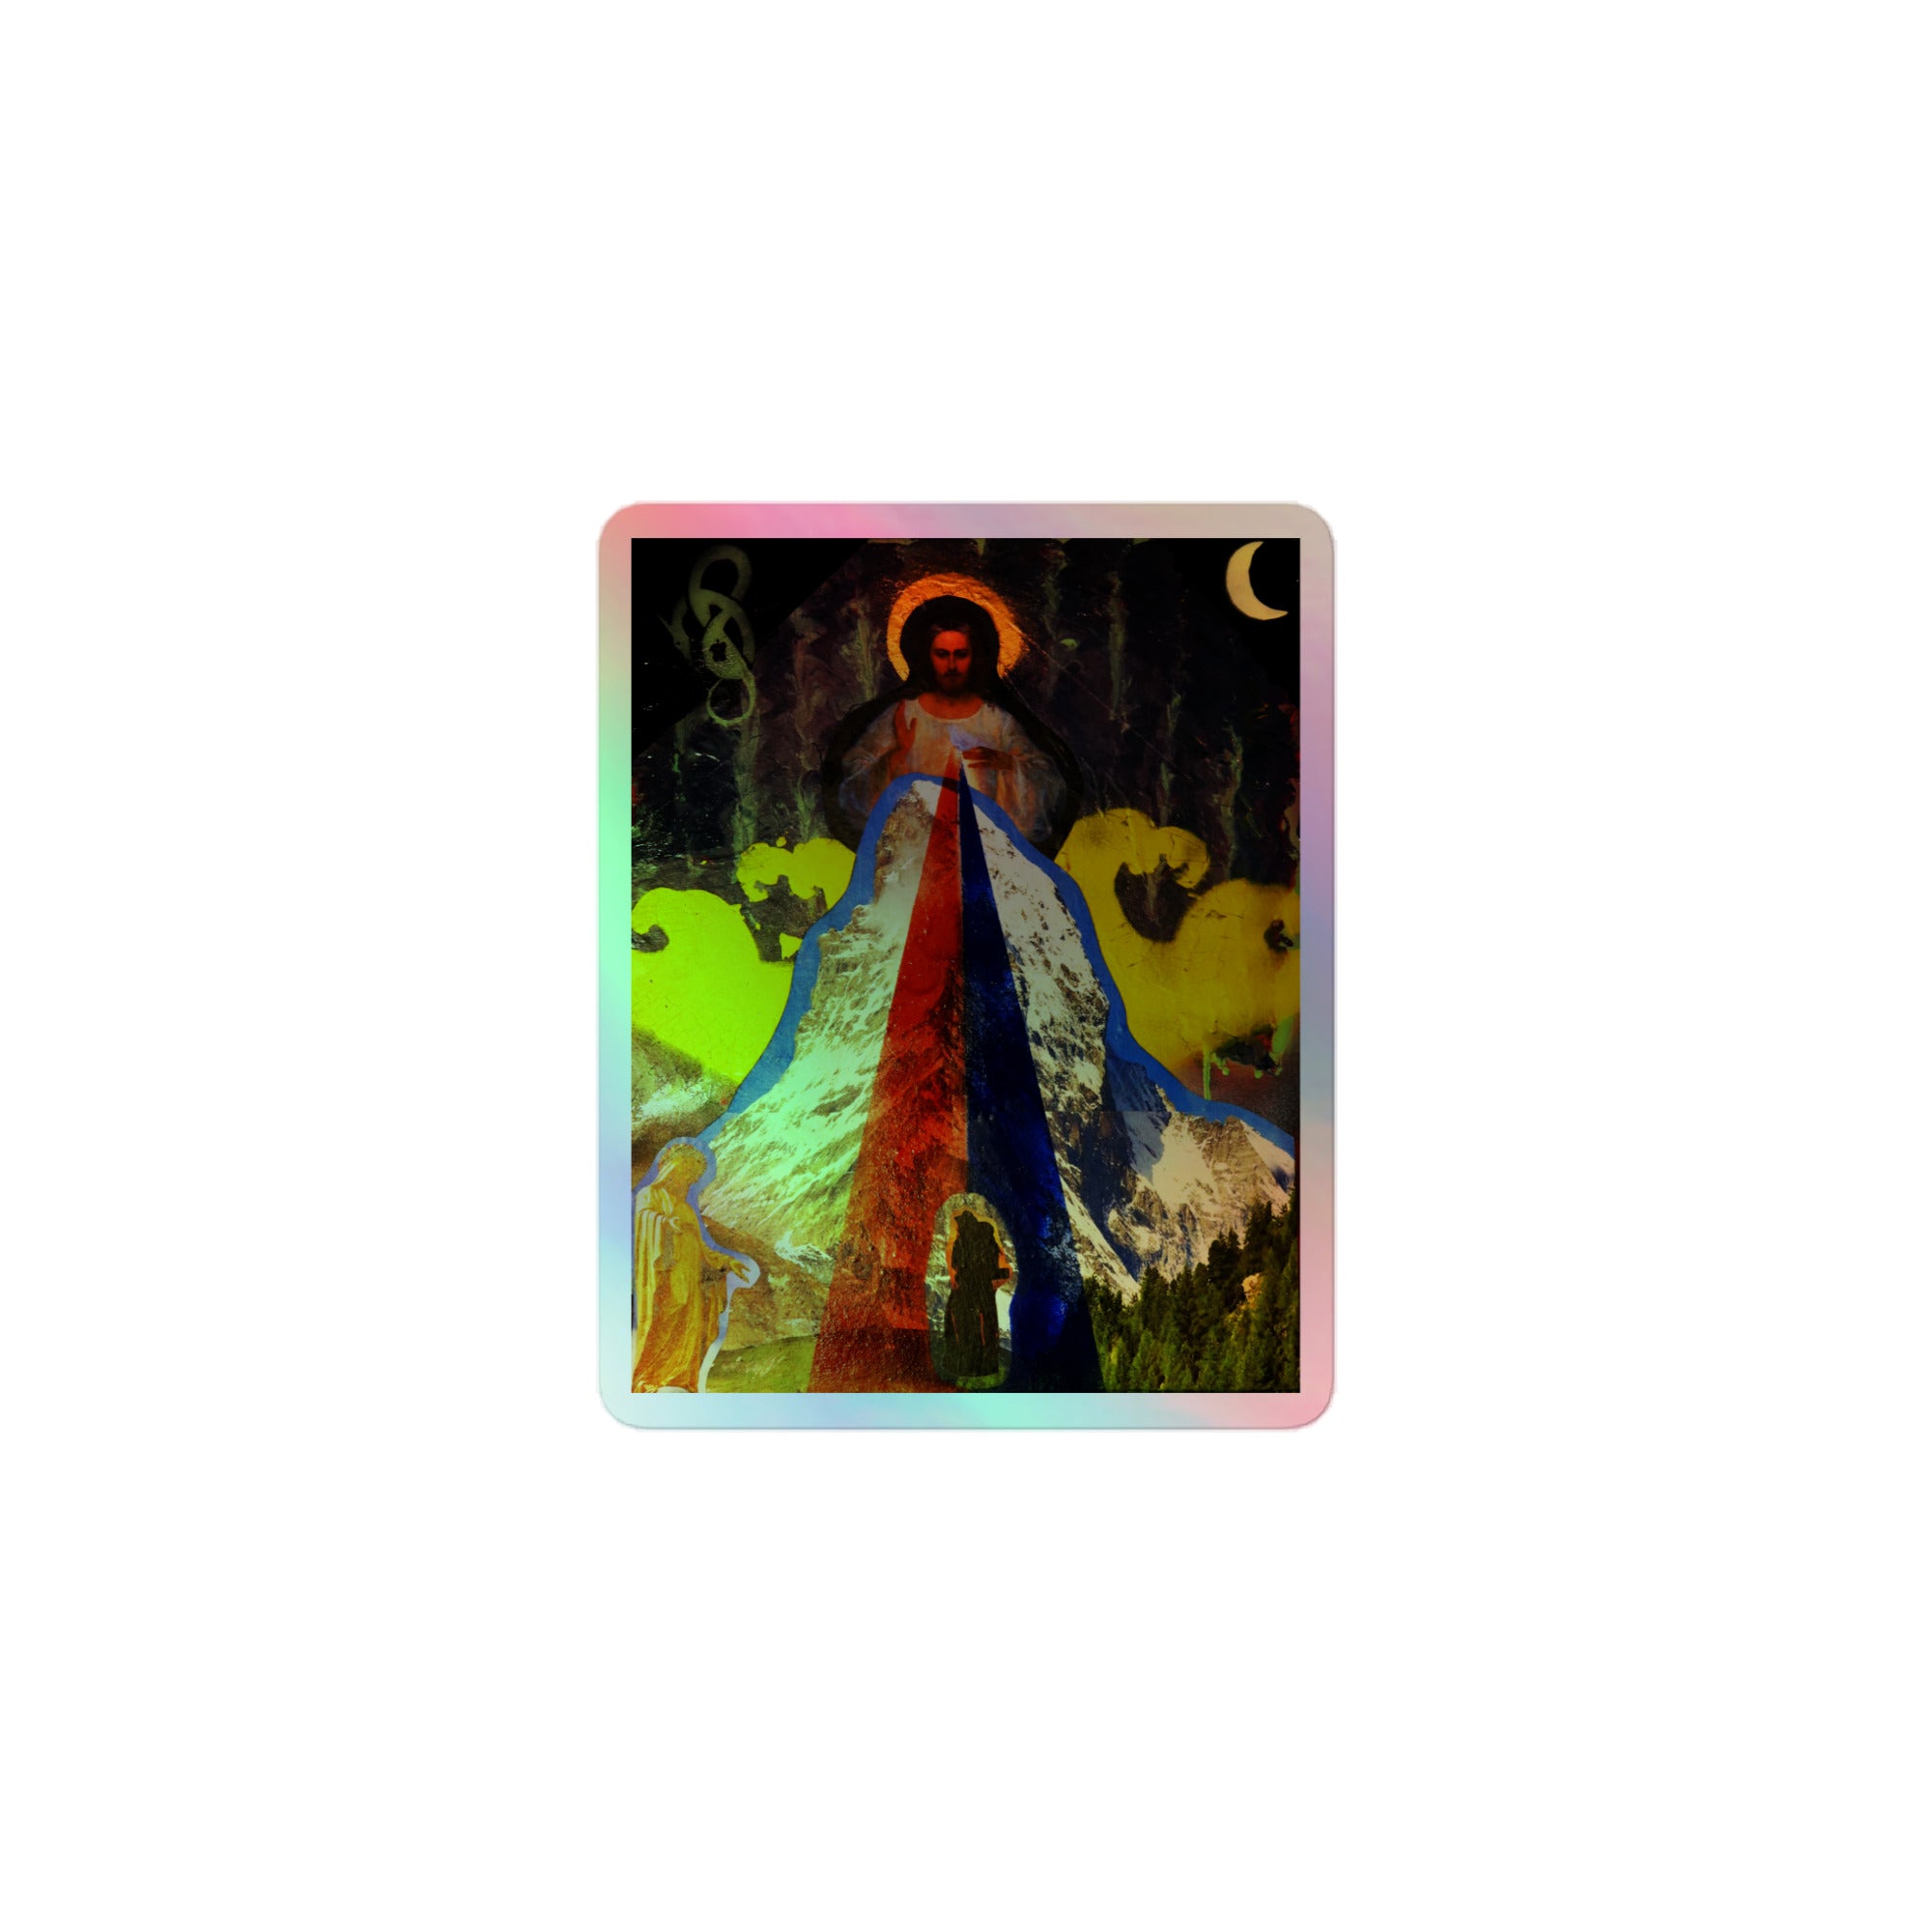 Br. T's Journey To Christ. (Holographic sticker.)